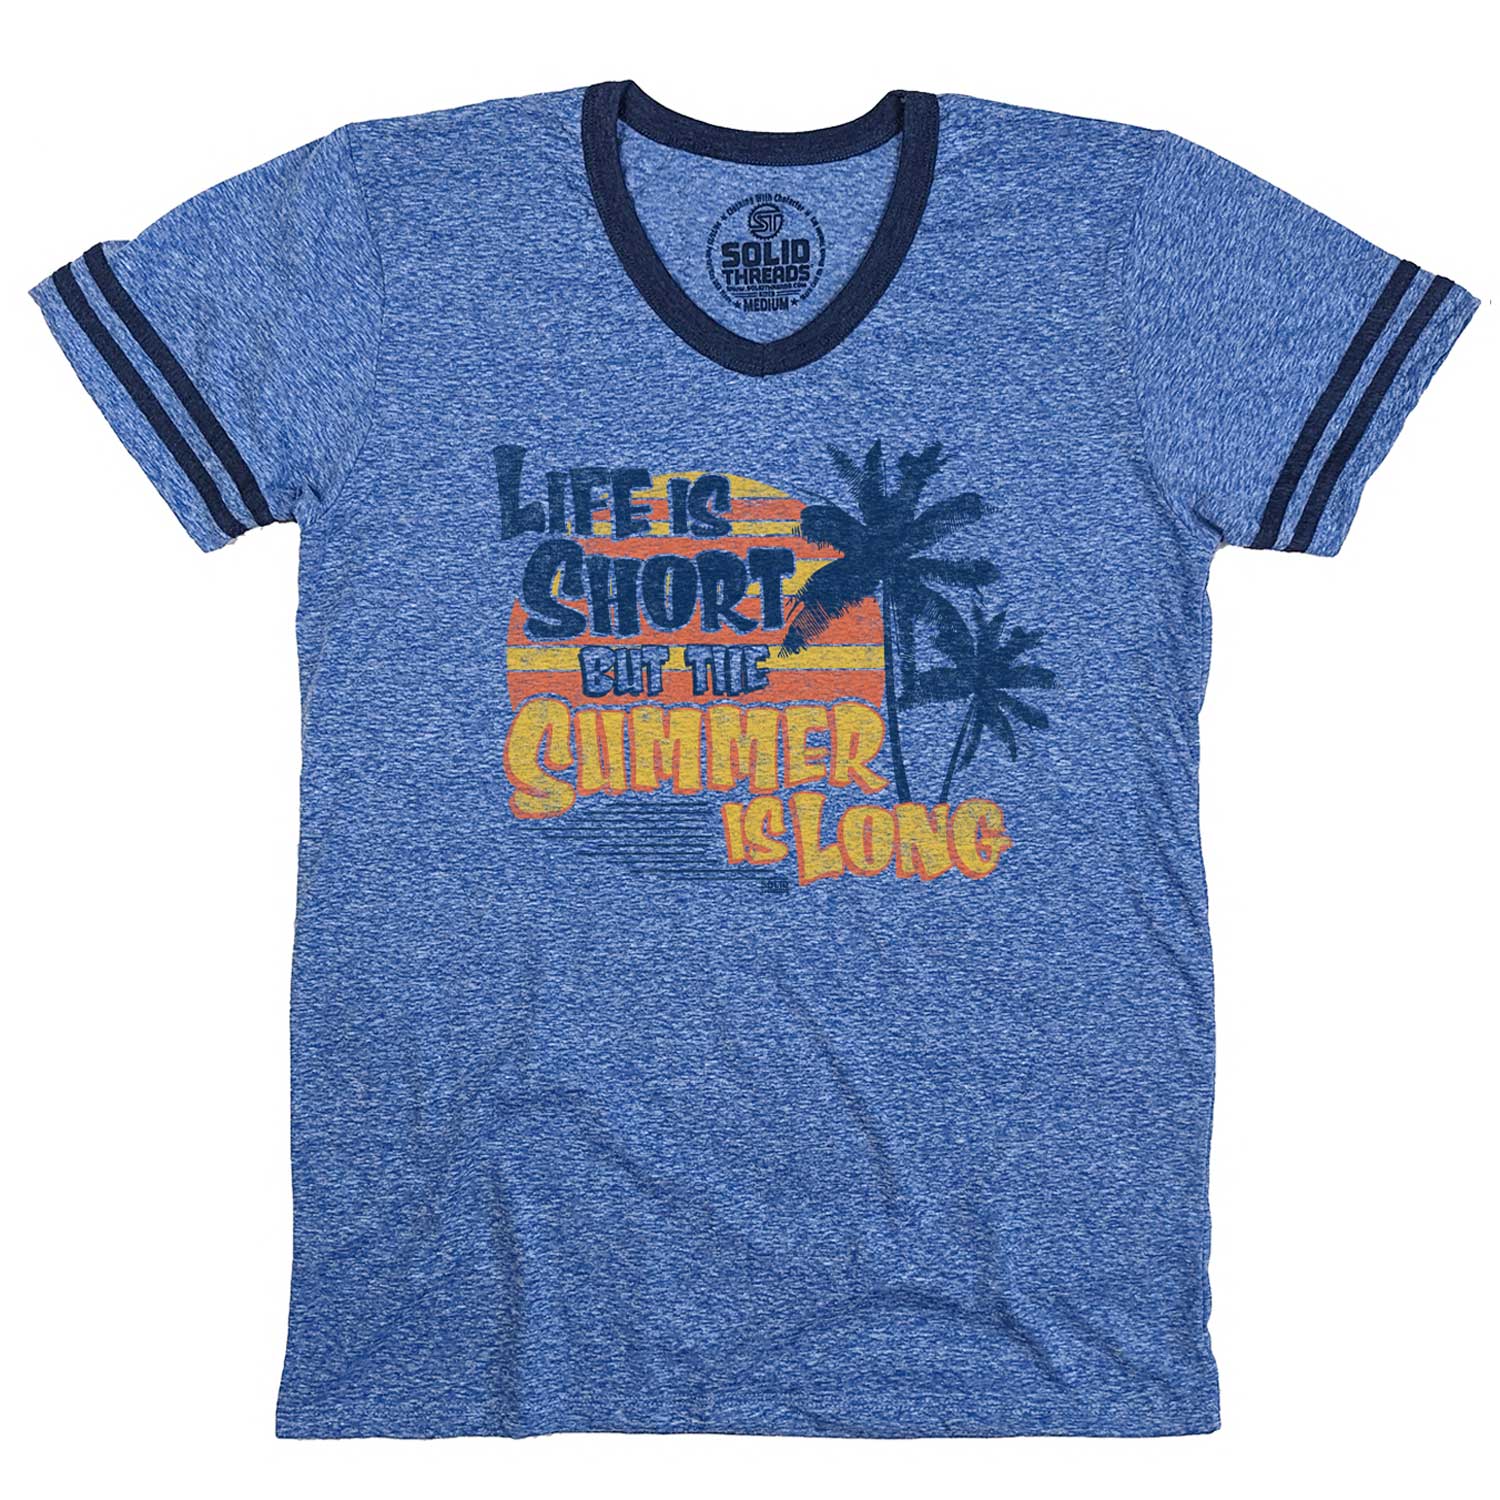 Men's Life is Short But the Summer is Long Cool Graphic V-neck | Retro Beach T-shirt | Solid Threads